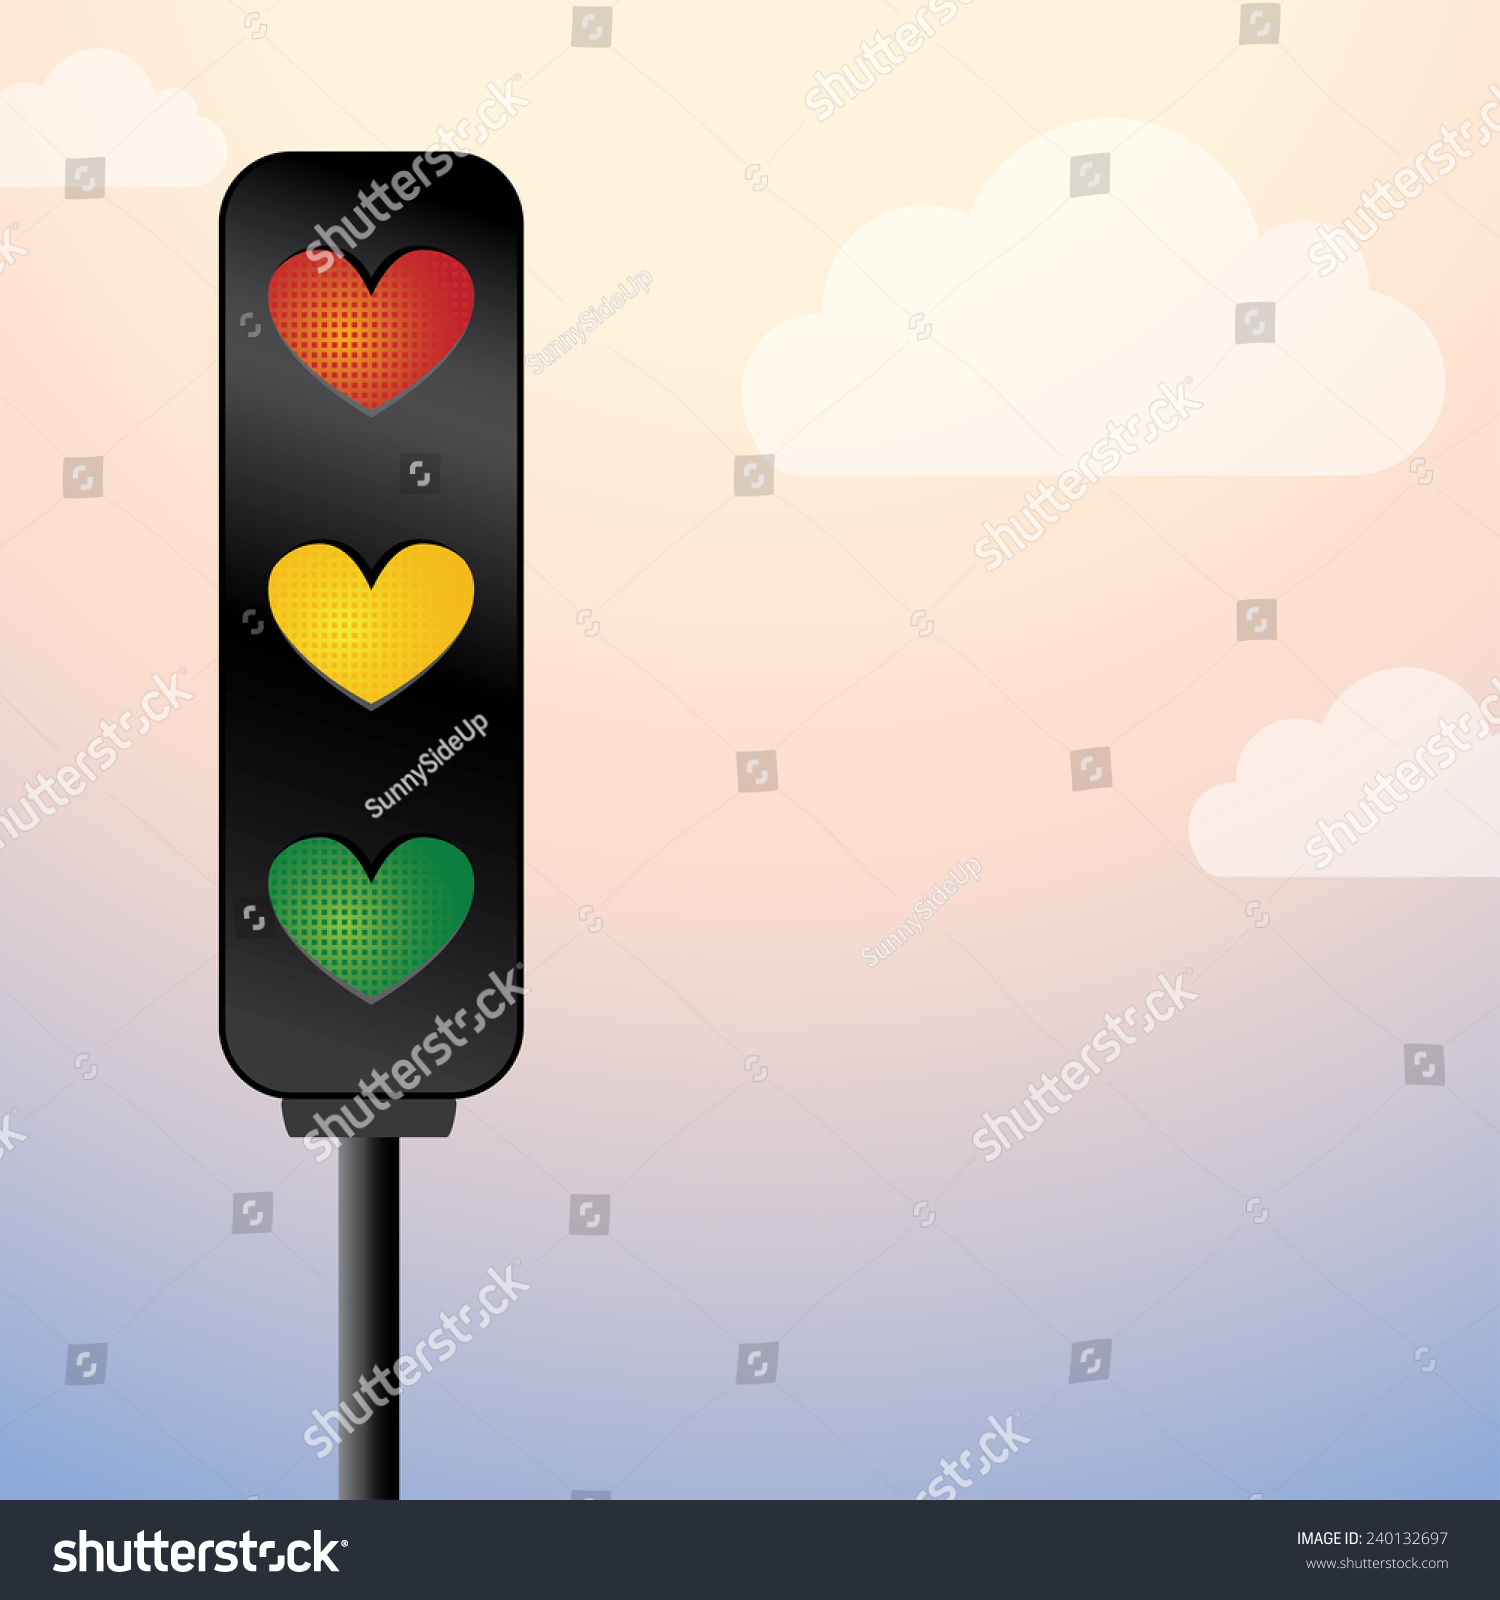 stock-vector-love-lights-creative-concept-stop-love-red-road-sign-love-ok-yellow-light-love-approved-green-240132697.jpg